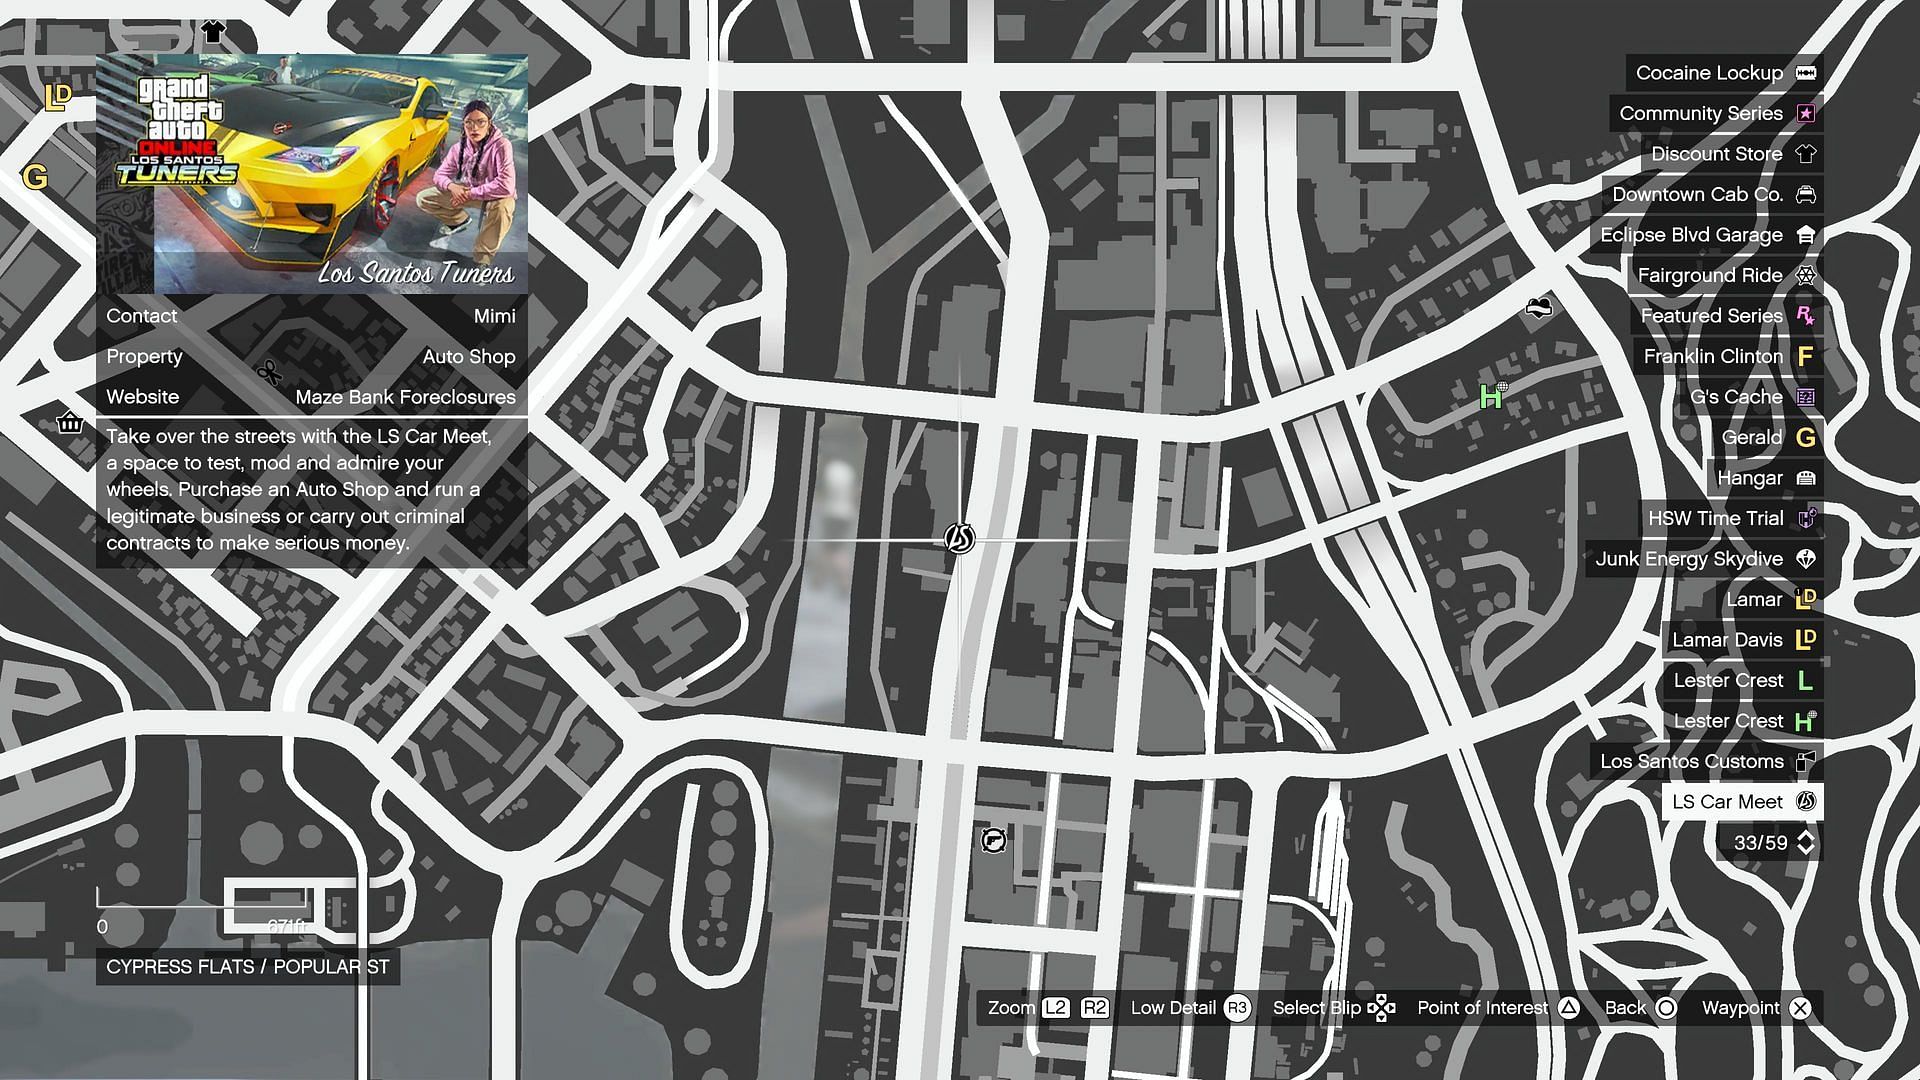 This is where you can find the LS Car Meet (Image via Rockstar Games)